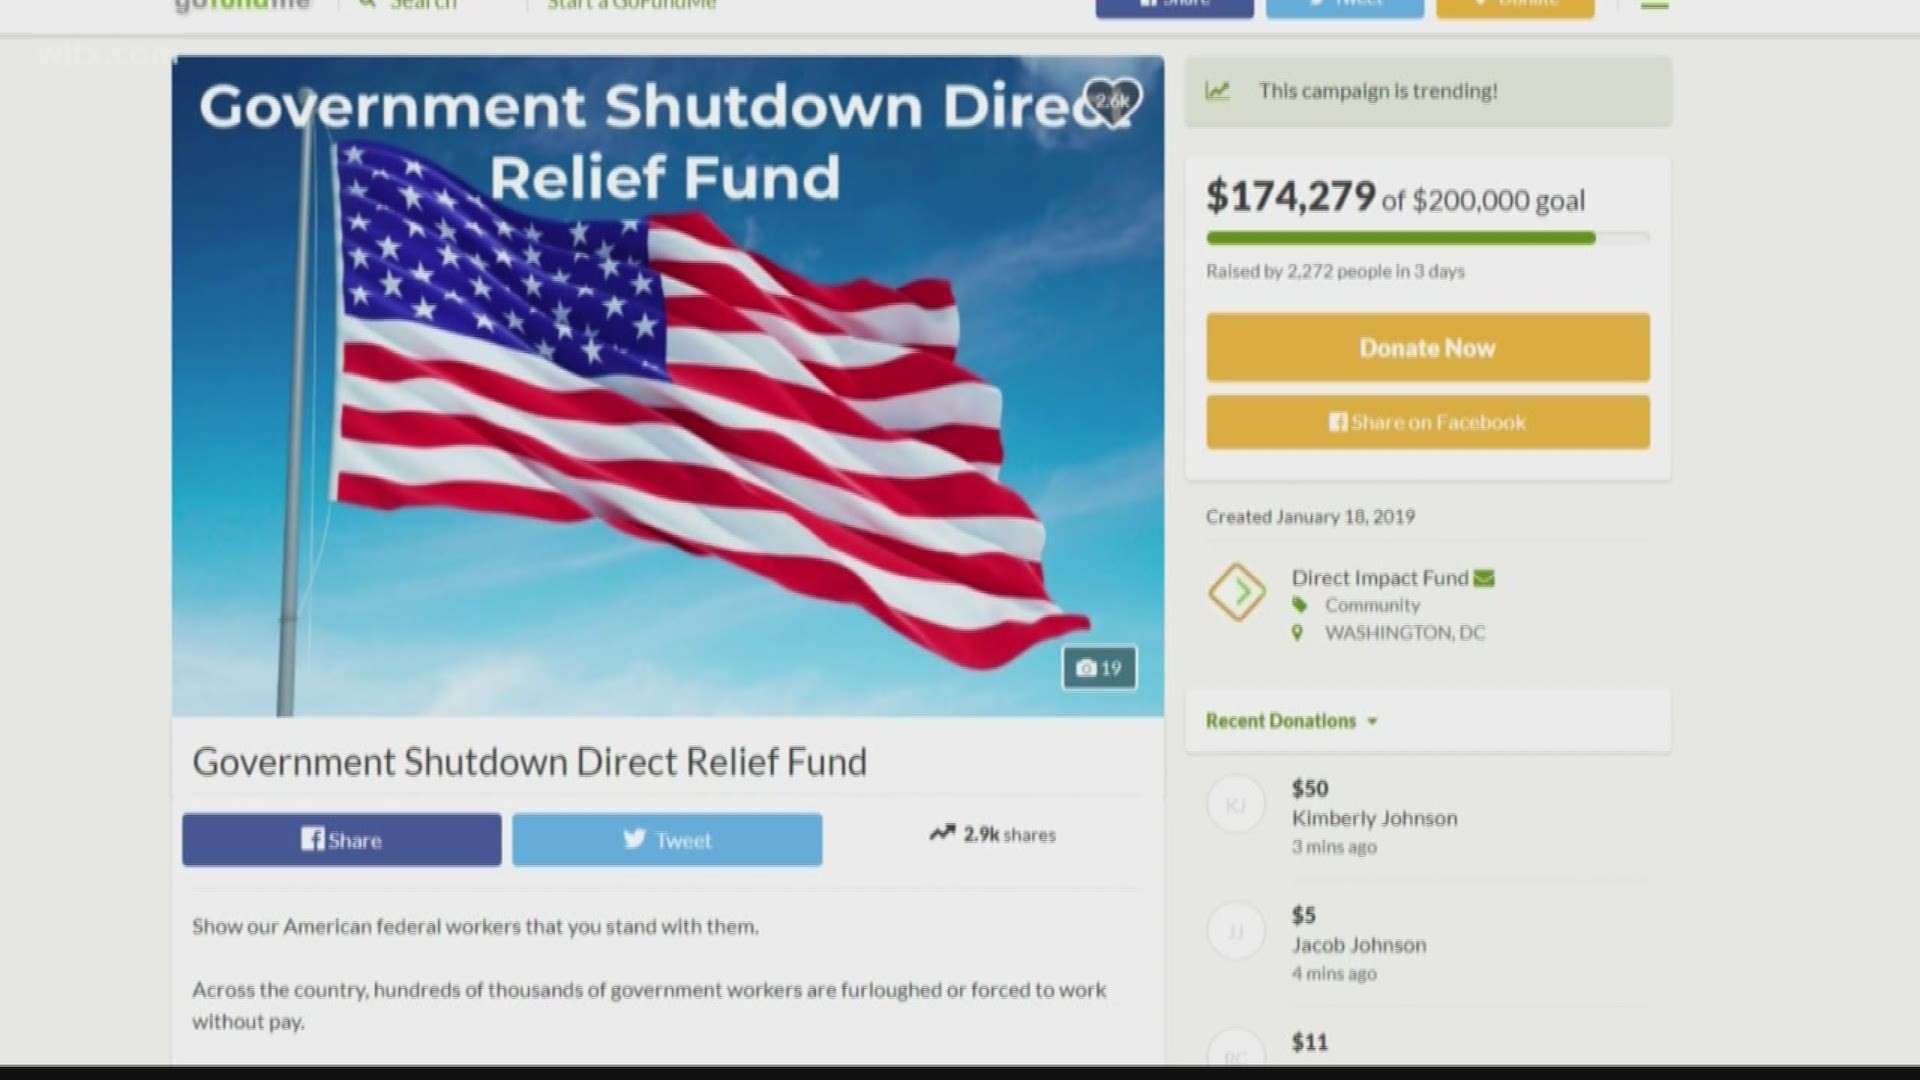 The Government Shutdown Direct Relief Fund has been set up to help furloughed federal workers during the government shutdown.